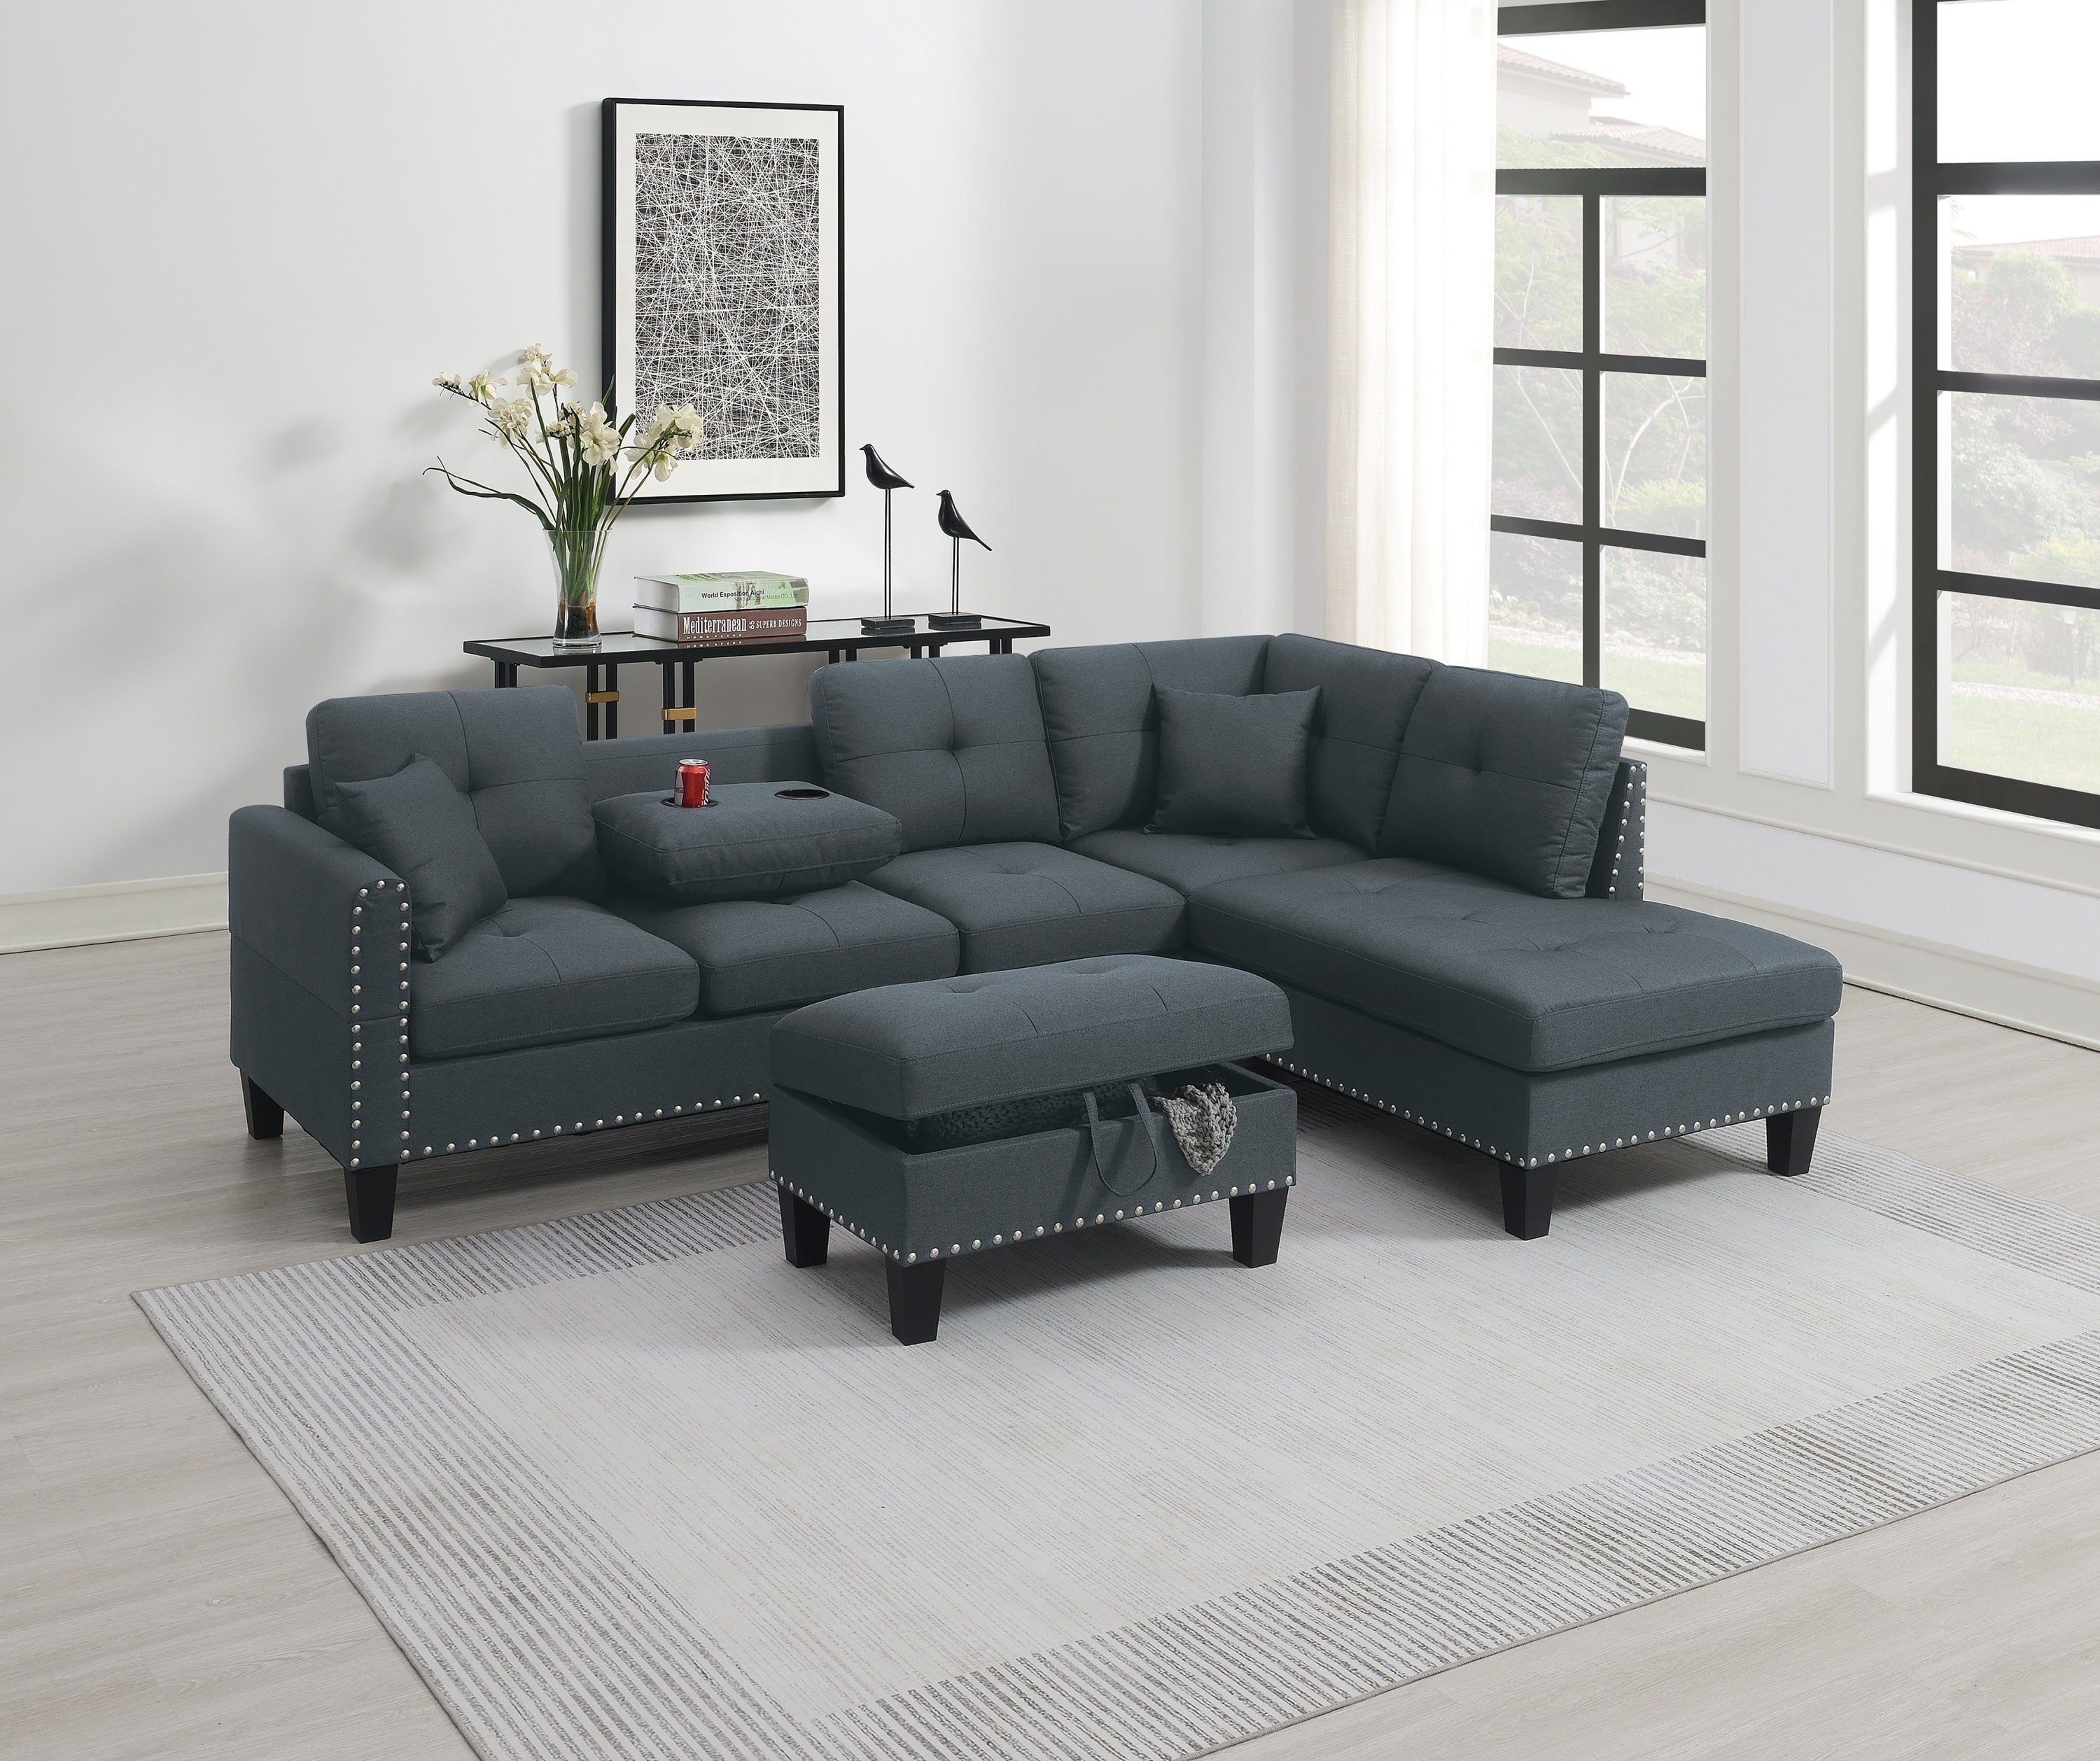 Dark Gray Linen-Like Sectional Sofa Set w/ Storage Ottoman & Cupholders-Stationary Sectionals-American Furniture Outlet